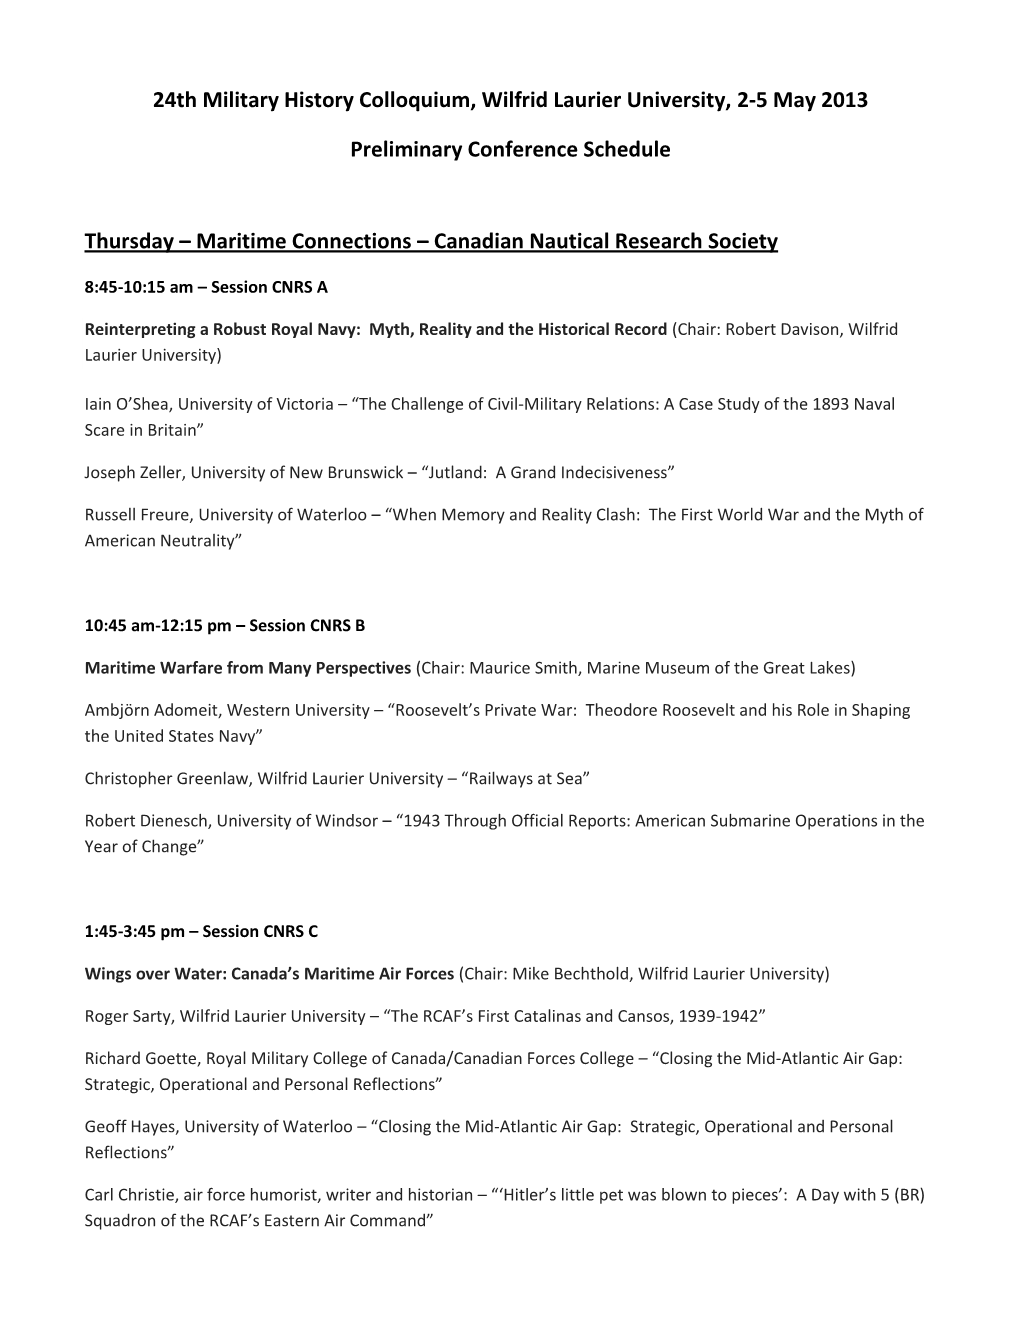 24Th Military History Colloquium, Wilfrid Laurier University, 2-5 May 2013